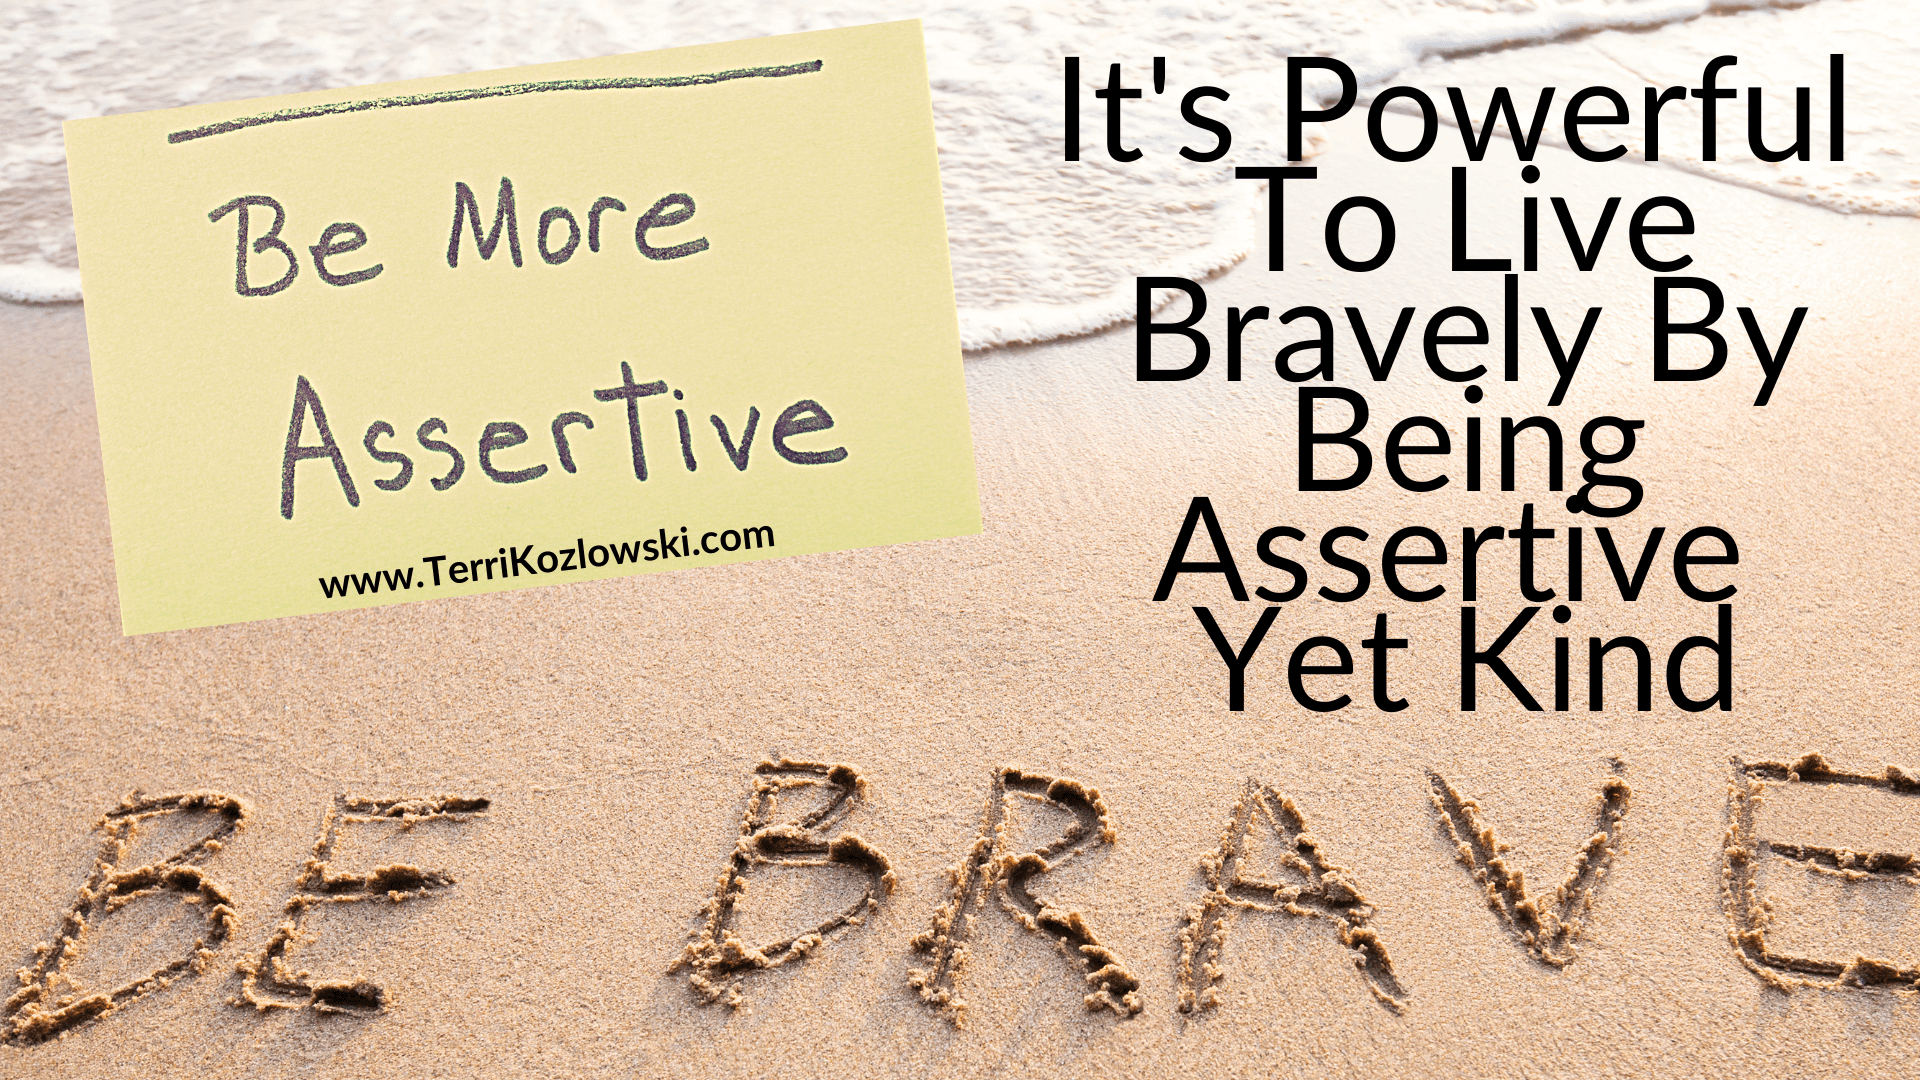 It's Powerful To Life Bravely By Being Assertive Yet Kind